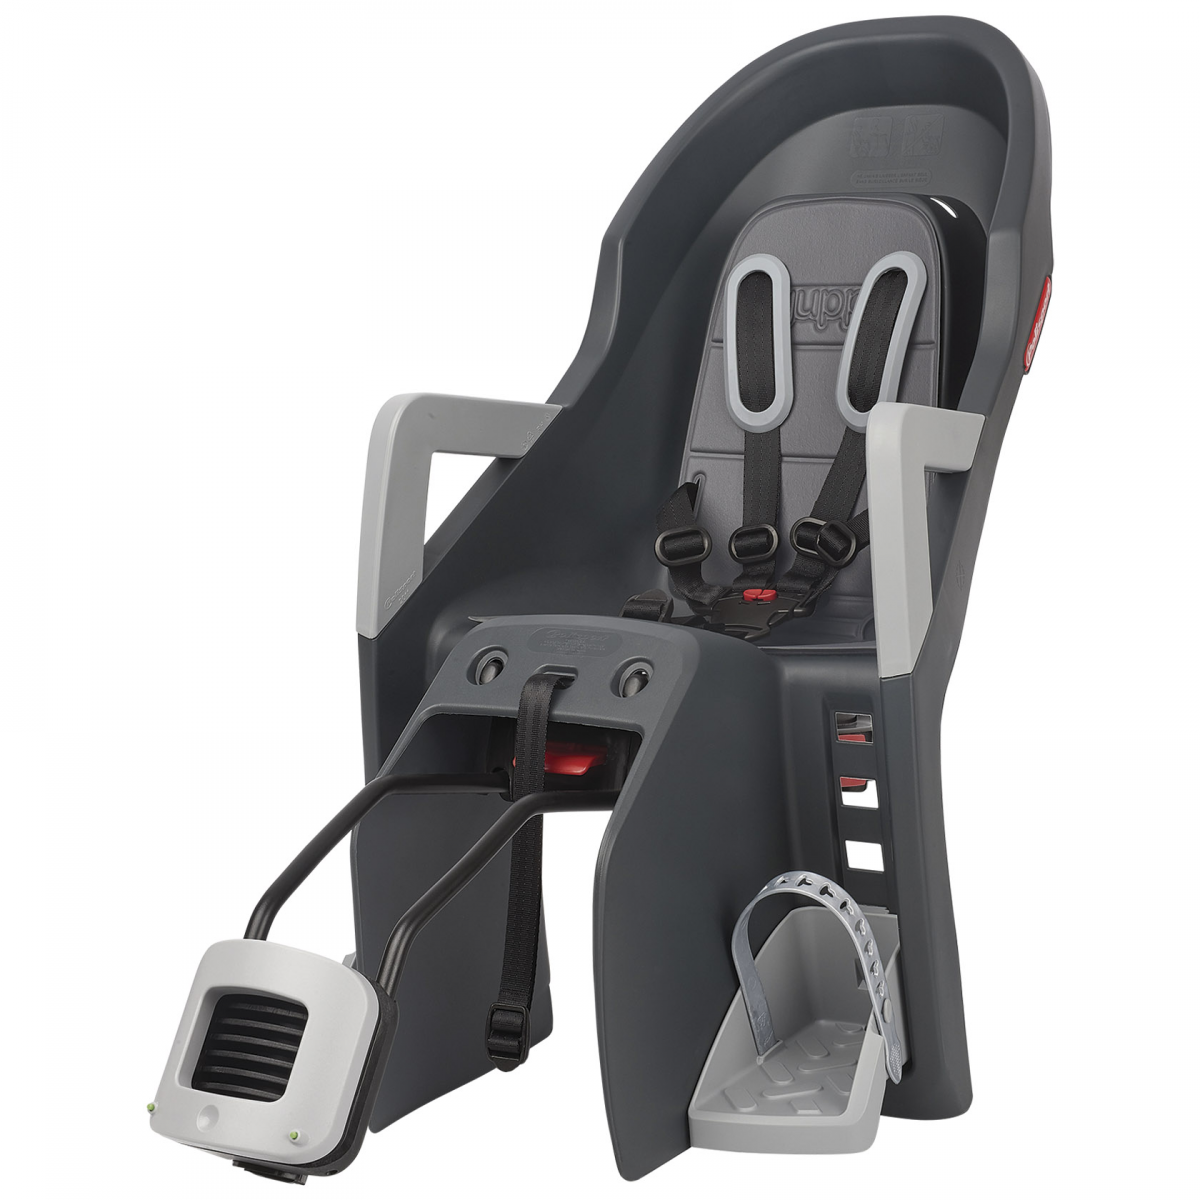 Guppy Maxi RS Plus - Rear Reclining Child Seat for Bikes 